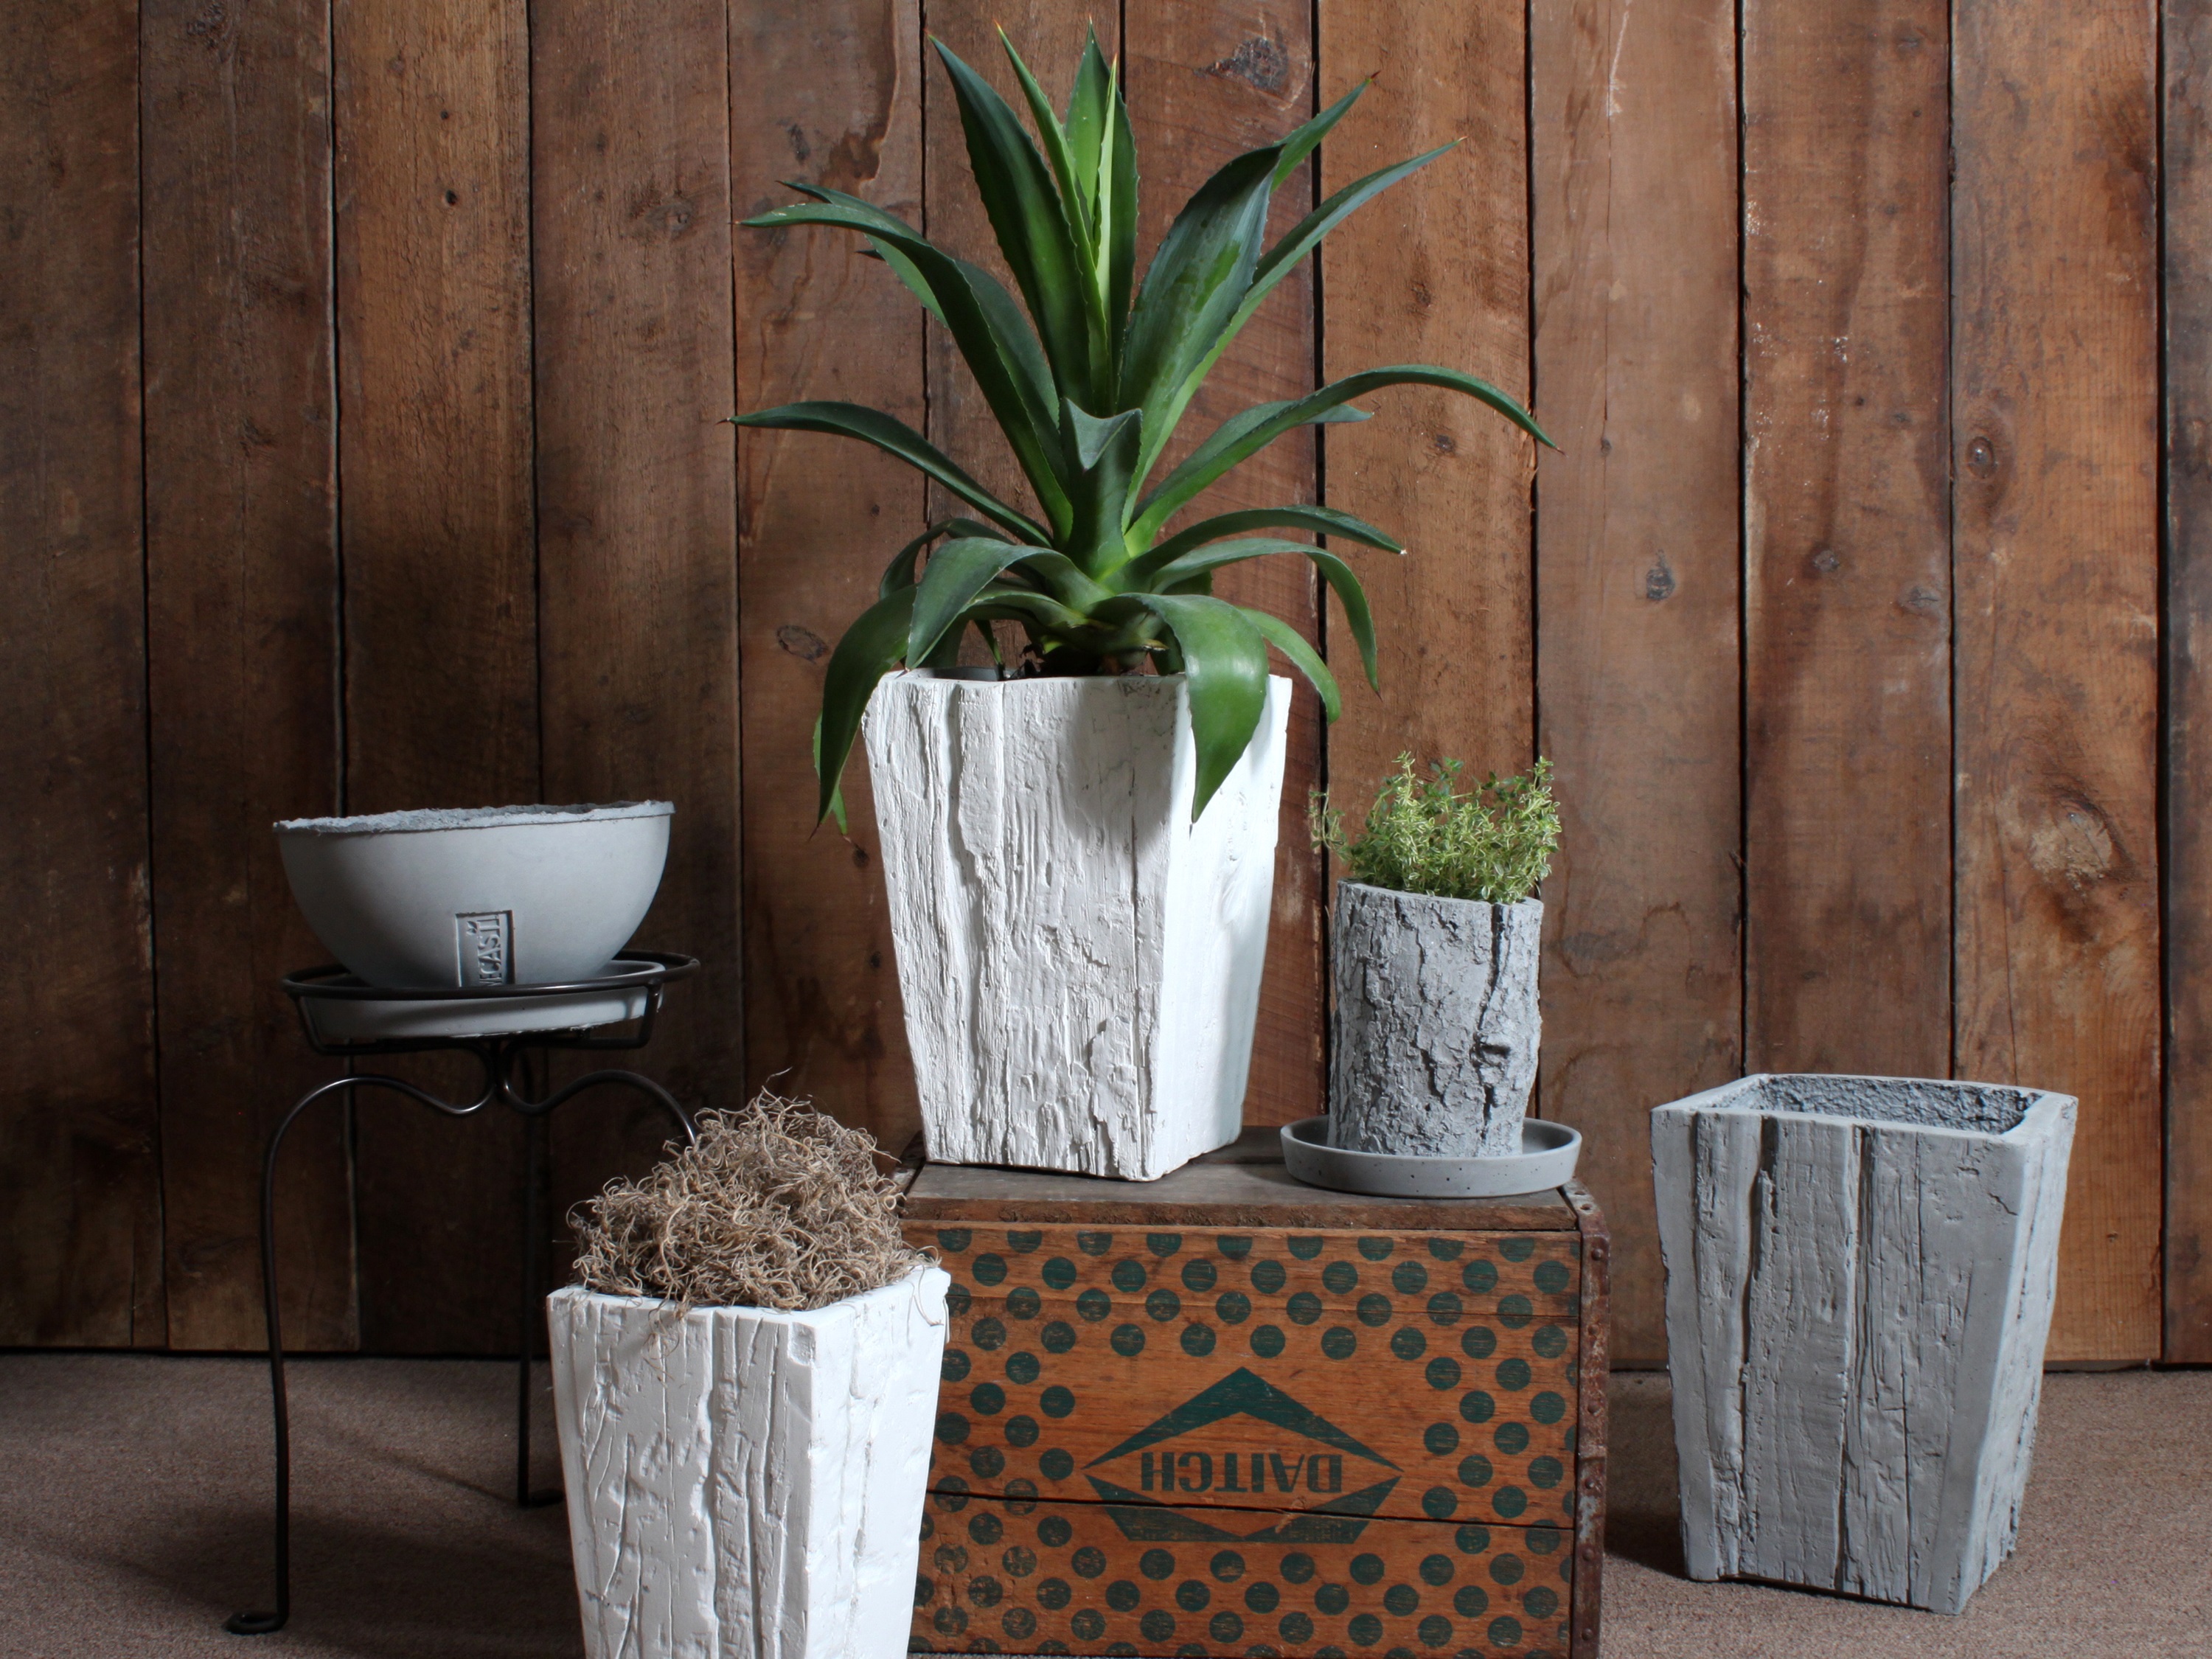 NativeCast's Planters are "Portable" and rustic looking, on trend for 2015